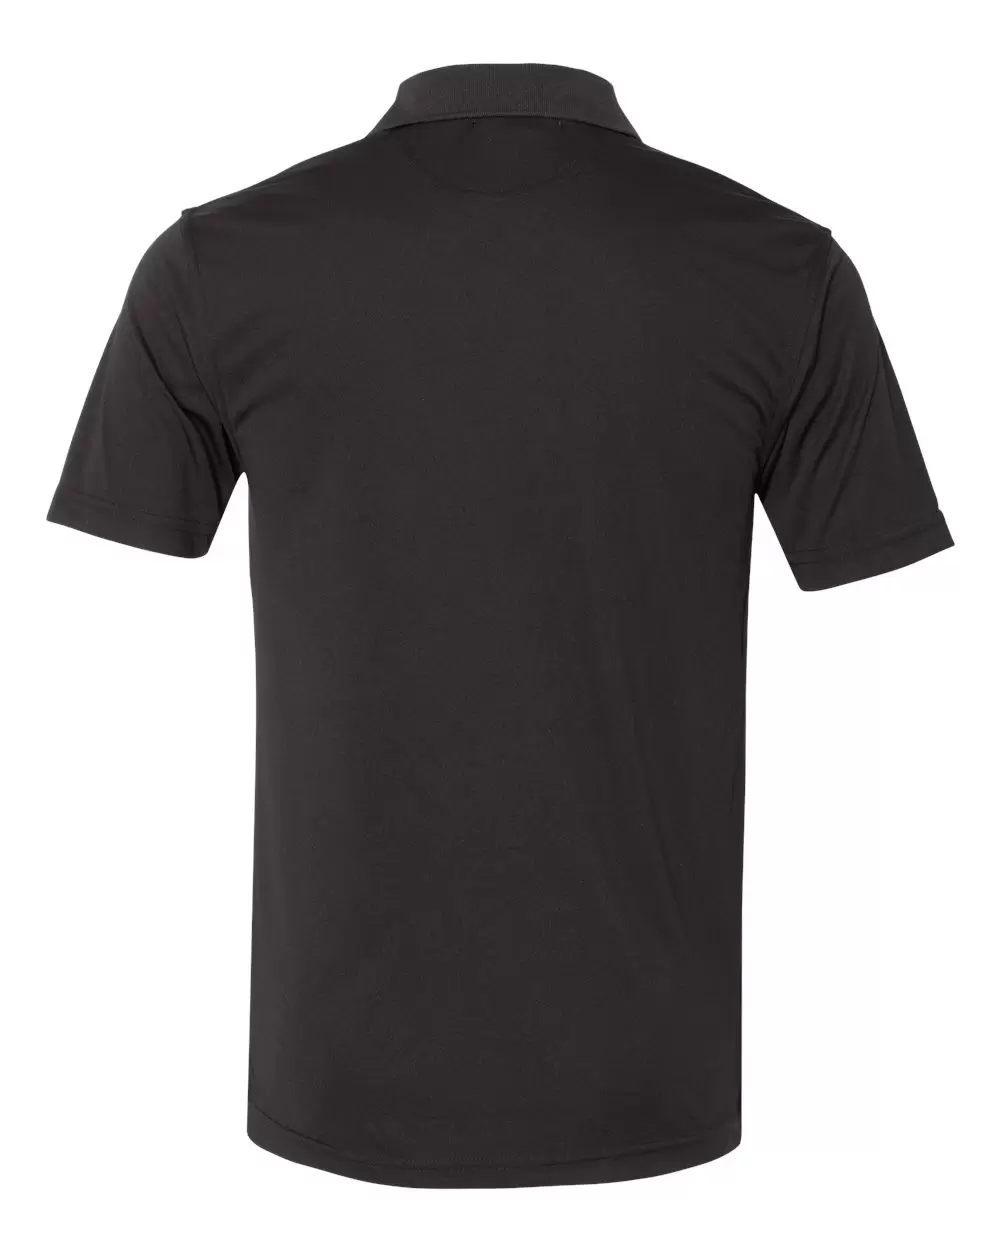 Sierra Pacific 0100 Value Polyester Polo Black - From $9.81